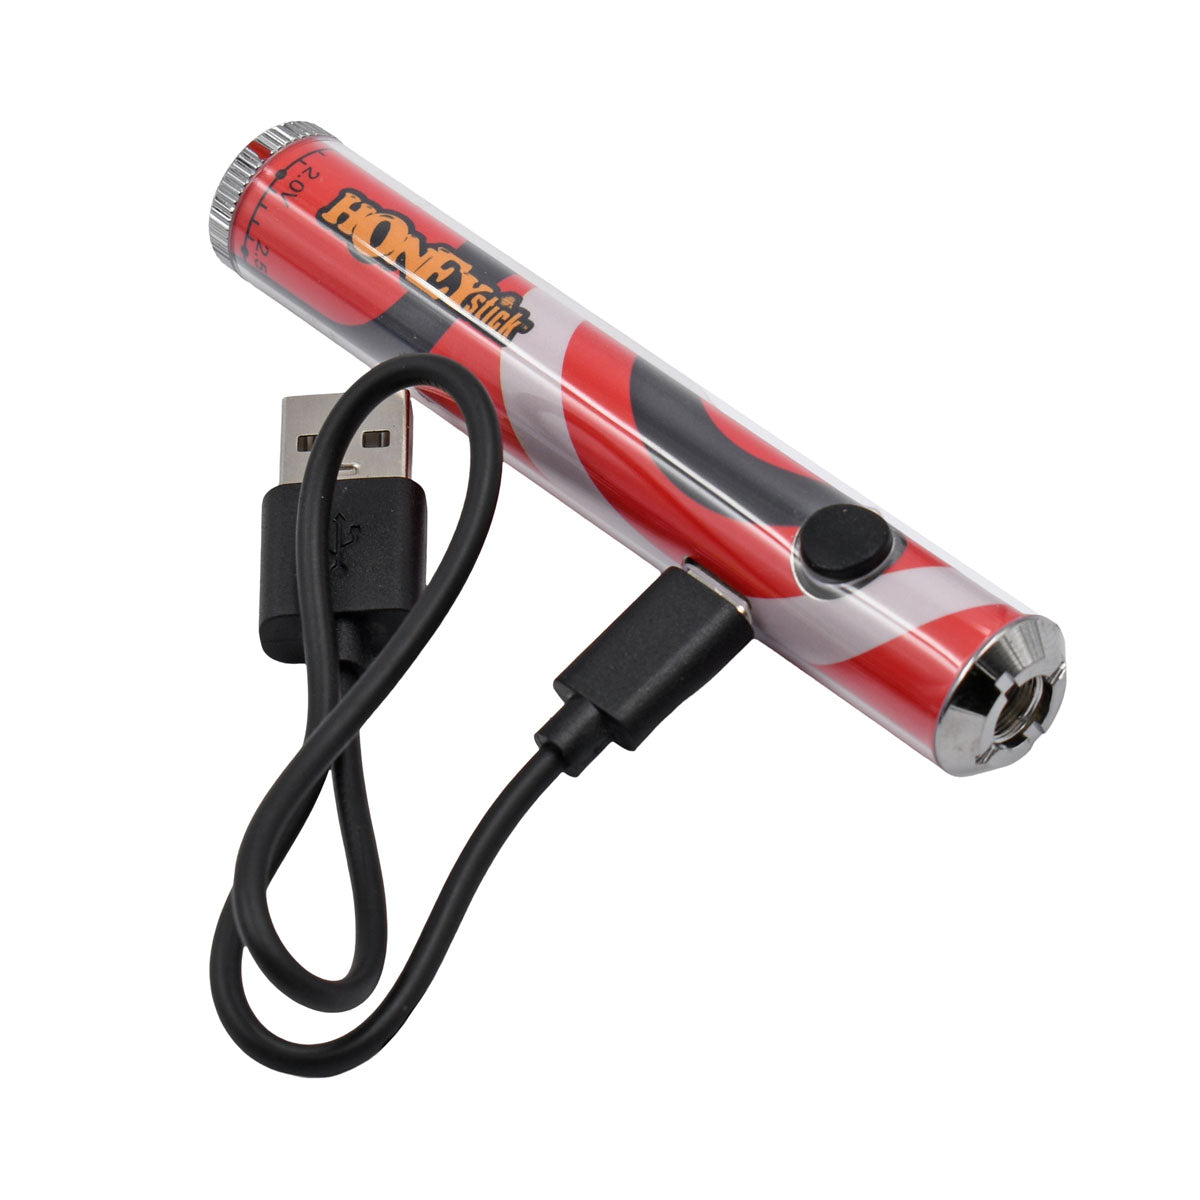 510 Twist Cartridge Battery - Push-Button and AutoDraw Action